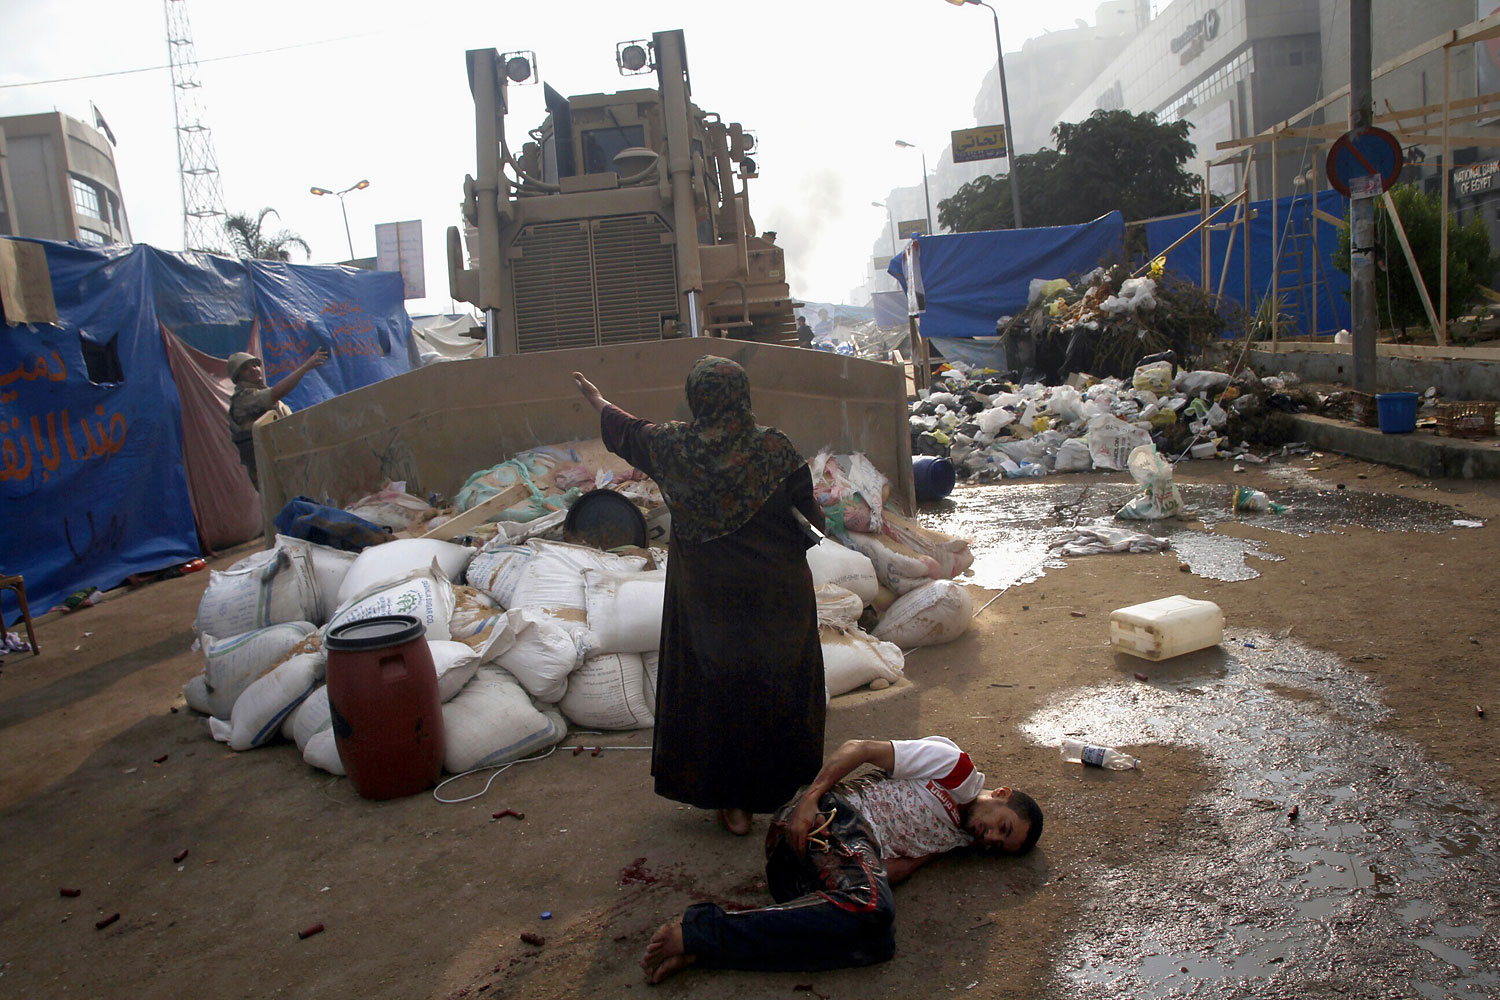 An Egyptian woman tries to stop a military bulldozer from hurting a wounded youth during clashes that broke out as Egyptian security forces moved in to disperse supporters of Egypt's deposed president Mohamed Morsi in a huge protest camp near Rabaa al-Adawiya mosque in eastern Cairo on Aug. 14, 2013.